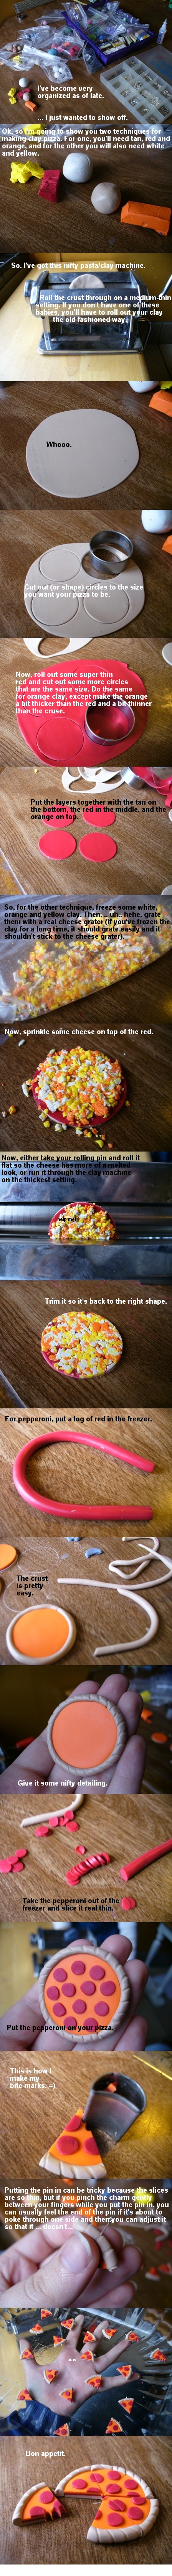 Pizza_Polymer_Clay_Tutorial_by_paperfaceparade.jpg